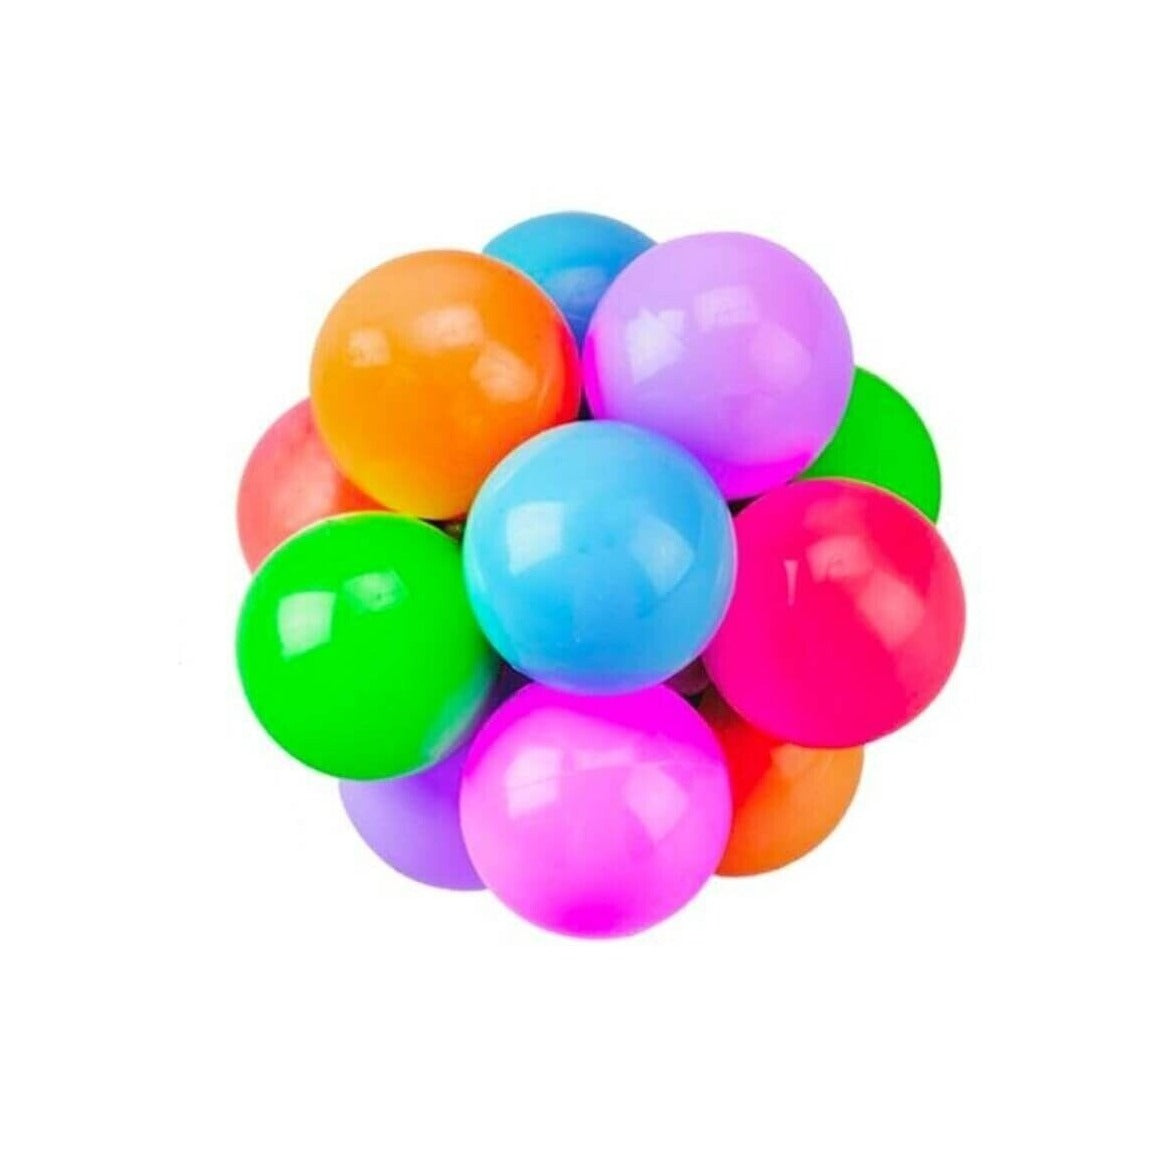 Clicky Clack Fidget Ball, Introducing the Clicky Clack Fidget Ball, the ultimate stress-reliever and sensory tool designed for individuals who seek calming sensory input. This pocket-sized wonder is packed with colorful little balls attached to the centre.This compact fidget toy offers endless hours of finger-rolling fun. The gobs of colorful balls provide a satisfying texture, perfect for those who find comfort in sensory stimulation. The gentle clicking sound adds an extra layer of sensory feedback, furth